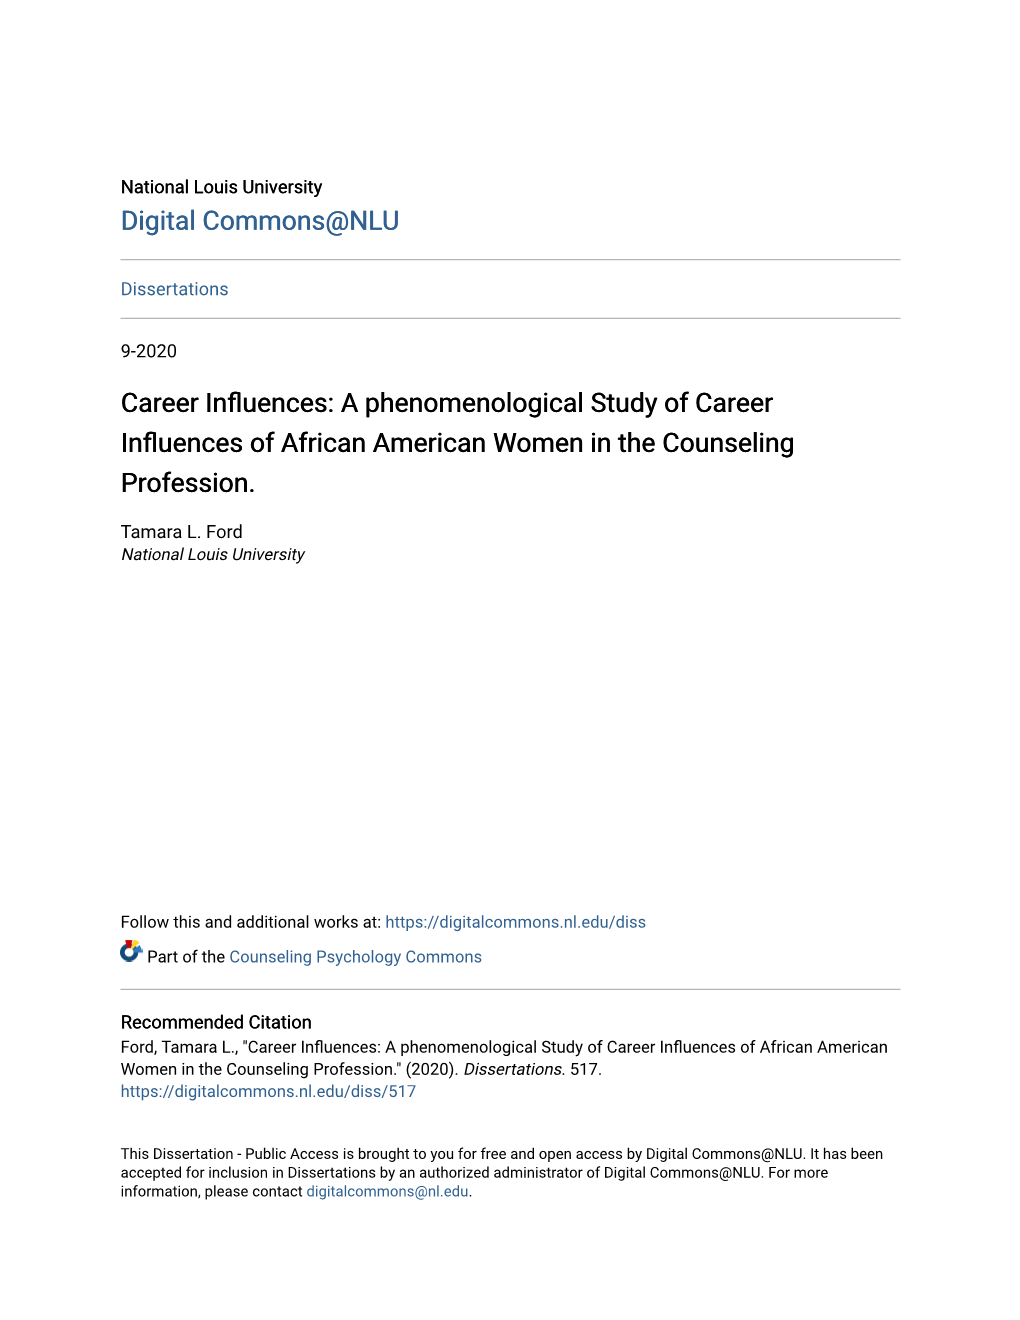 A Phenomenological Study of Career Influences of African American Omenw in the Counseling Profession